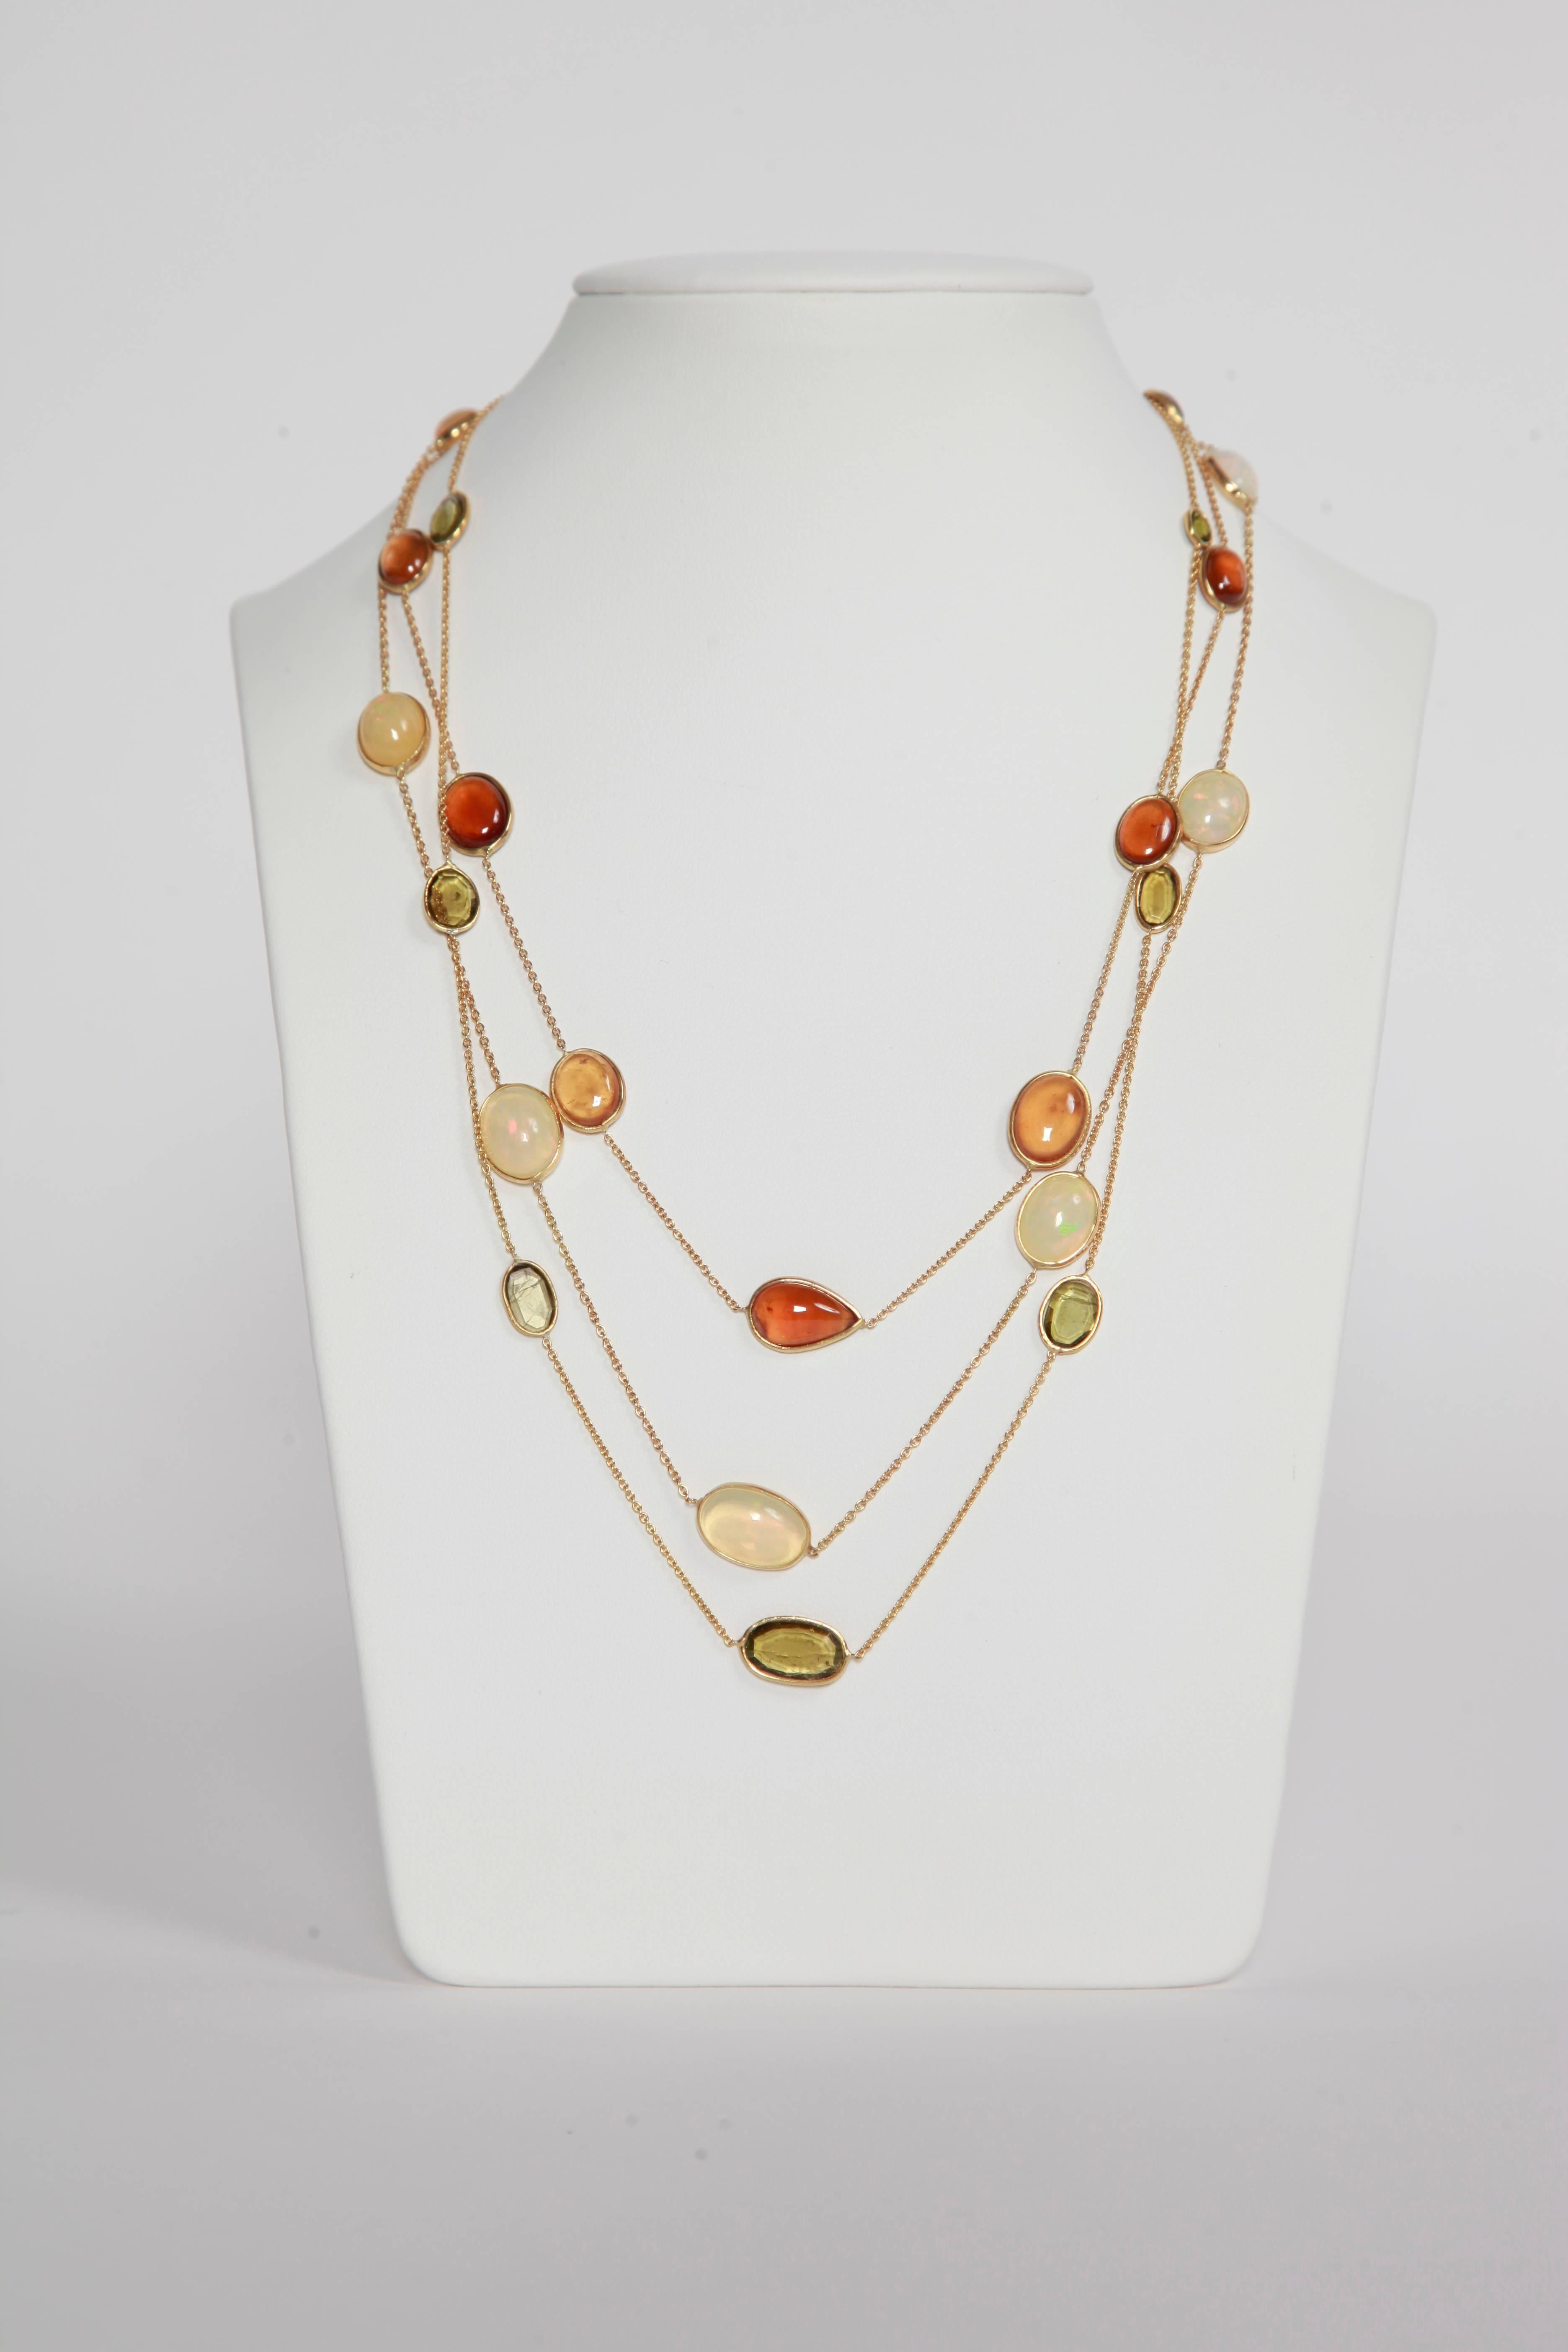 Women's Marion Jeantet Hessonite Garnet Cabochons Yellow Gold Necklace